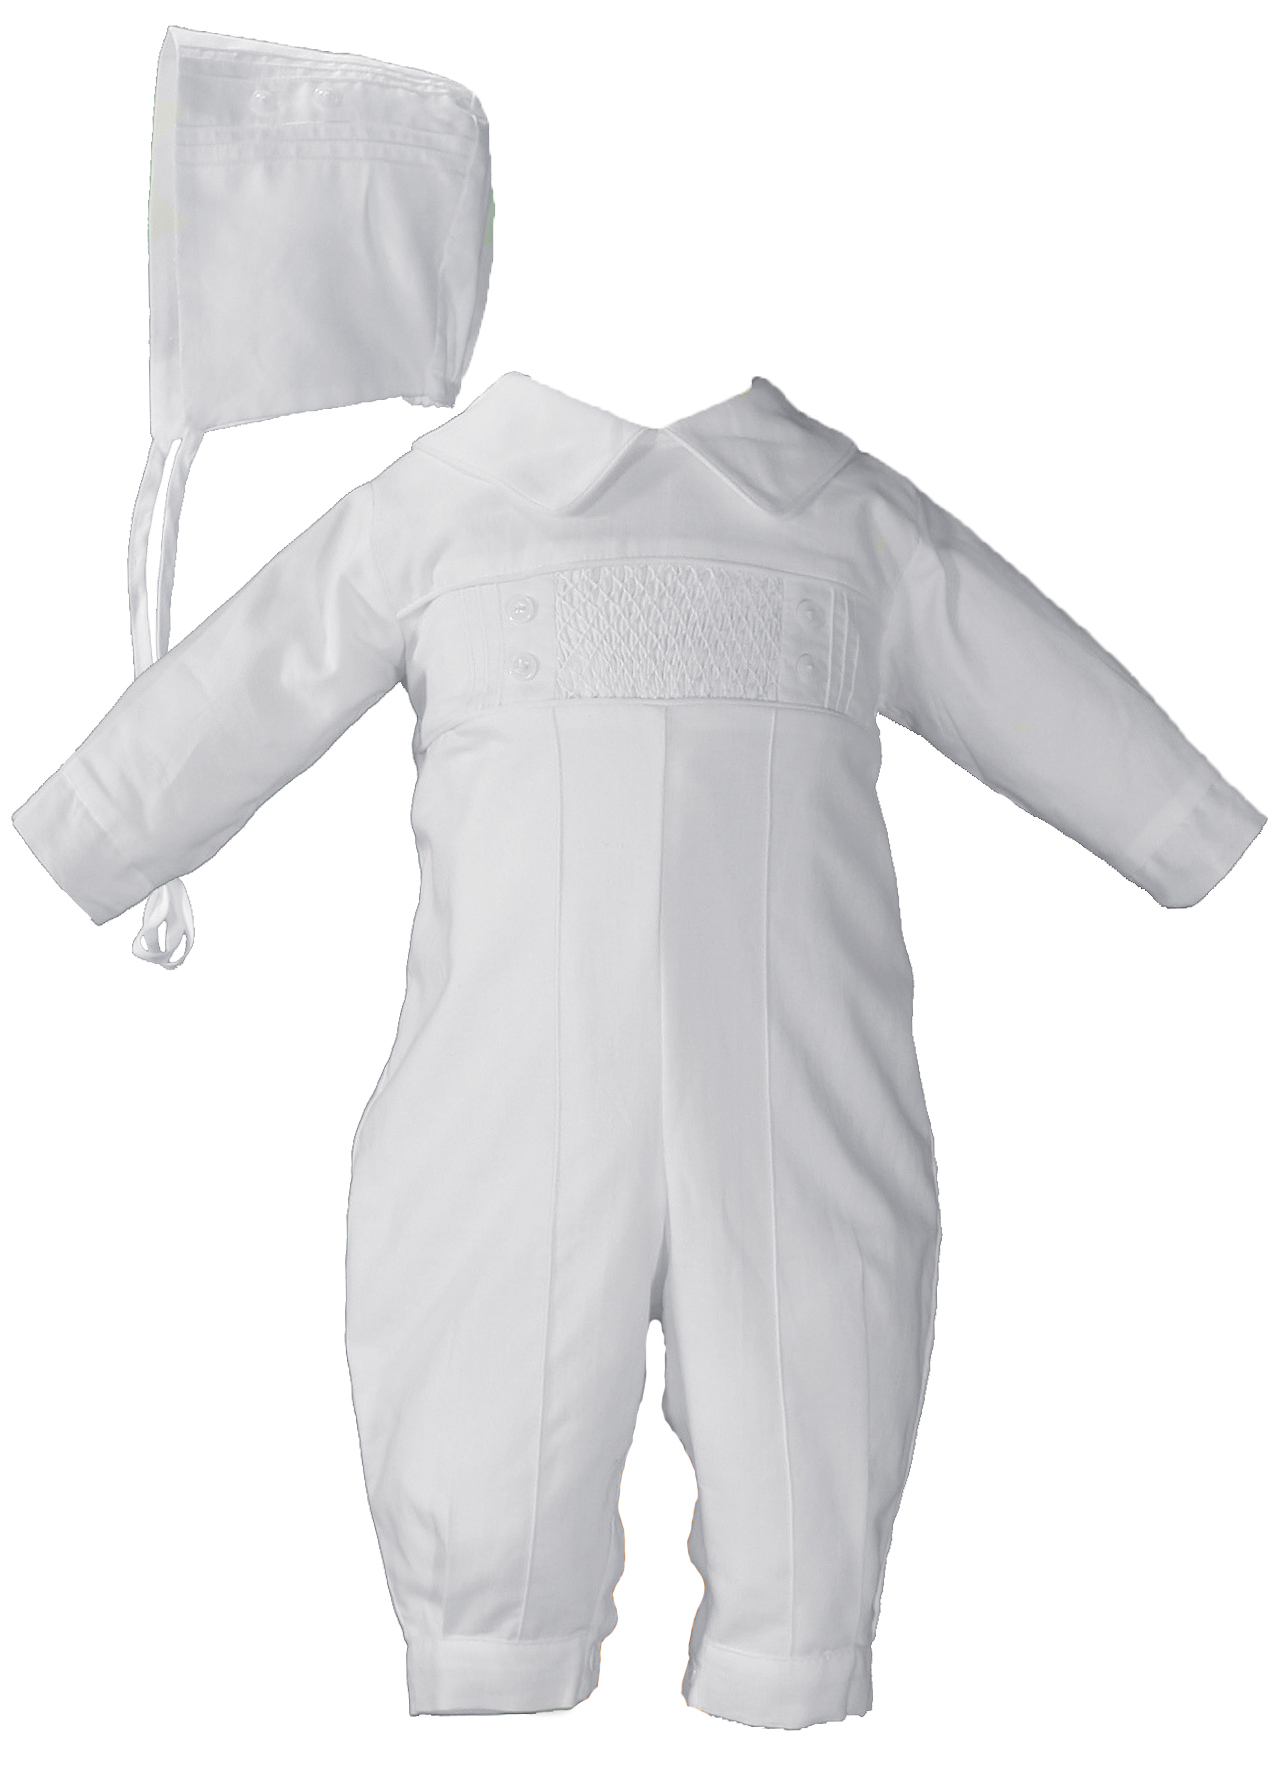 Baby Boys White Cotton Smocked Baptism Outfit Set - Little Things Mean a Lot